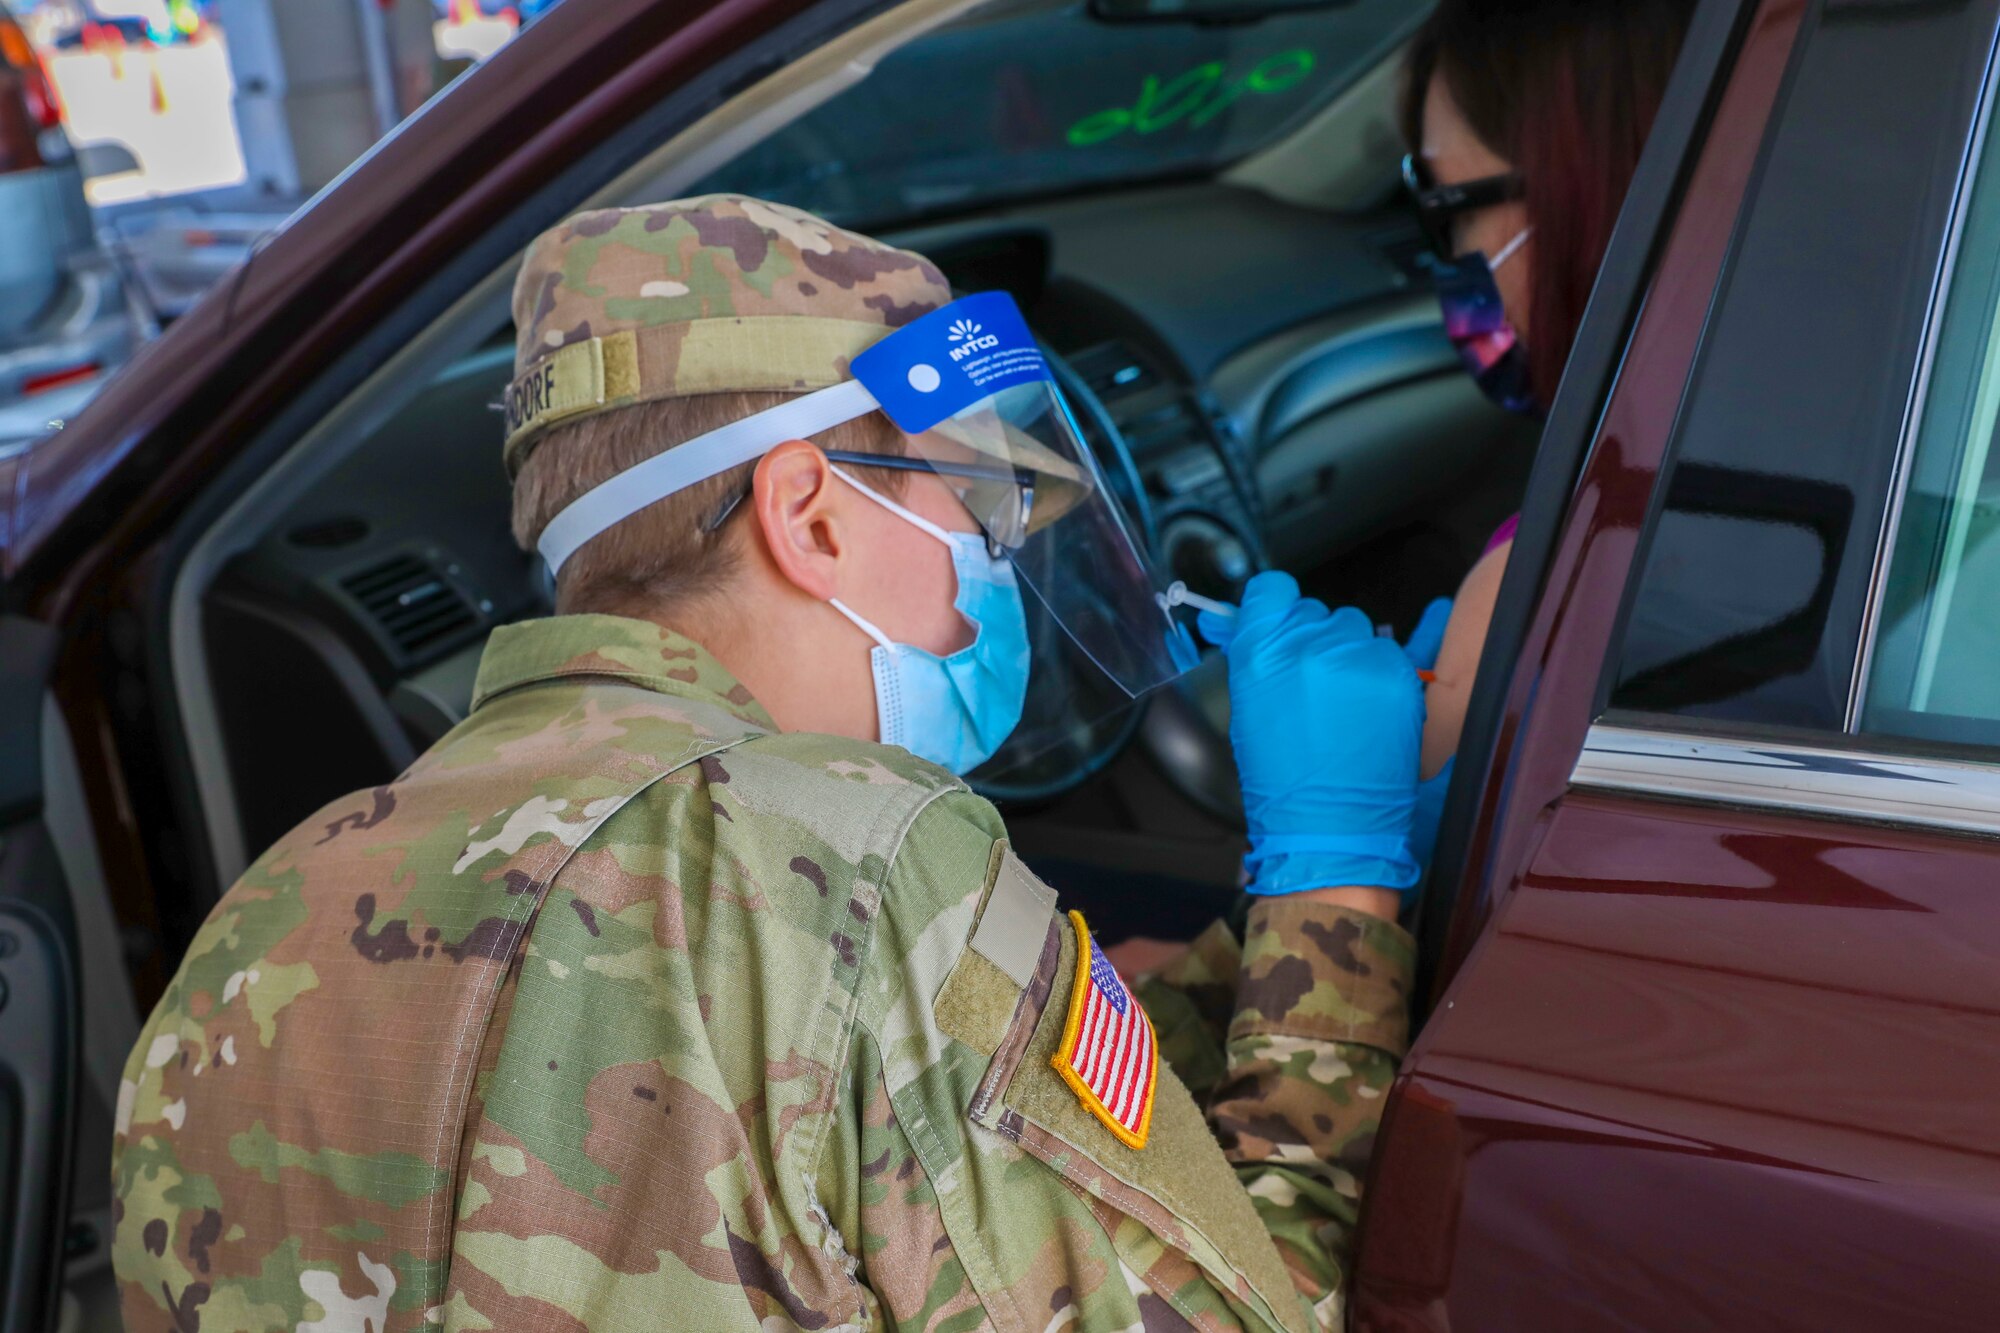 Army Spc. Montana Rose Roggendorf administers a COVID-19 vaccination at the Fair Park Community Vaccination Center in Dallas, March 8, 2021.